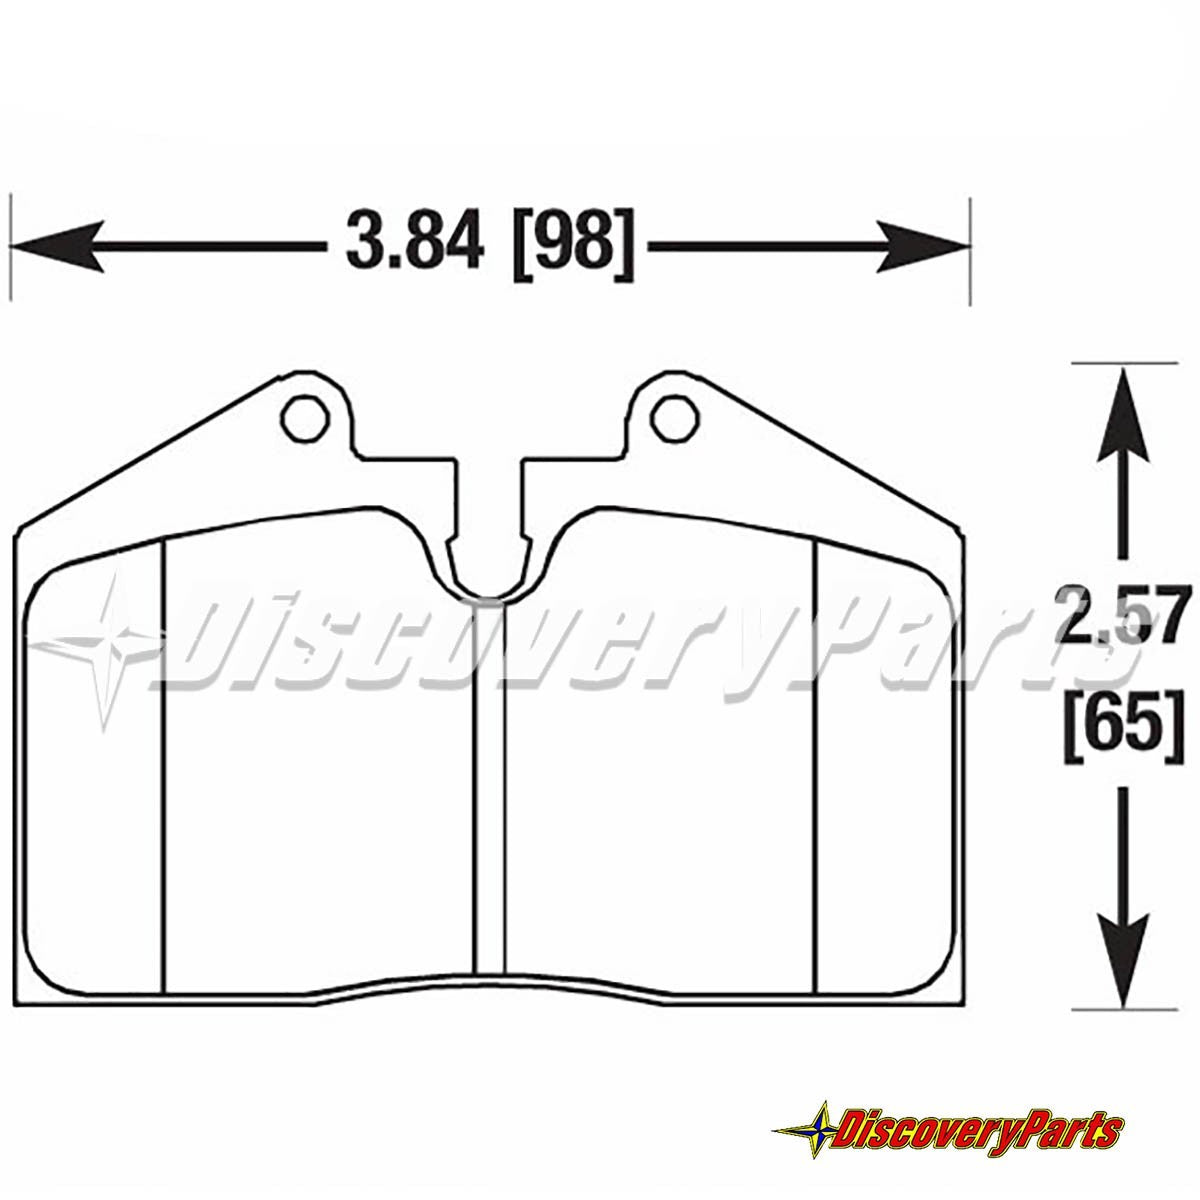 Carbotech CT345 Race Pads for Stoptech ST-41 Caliper